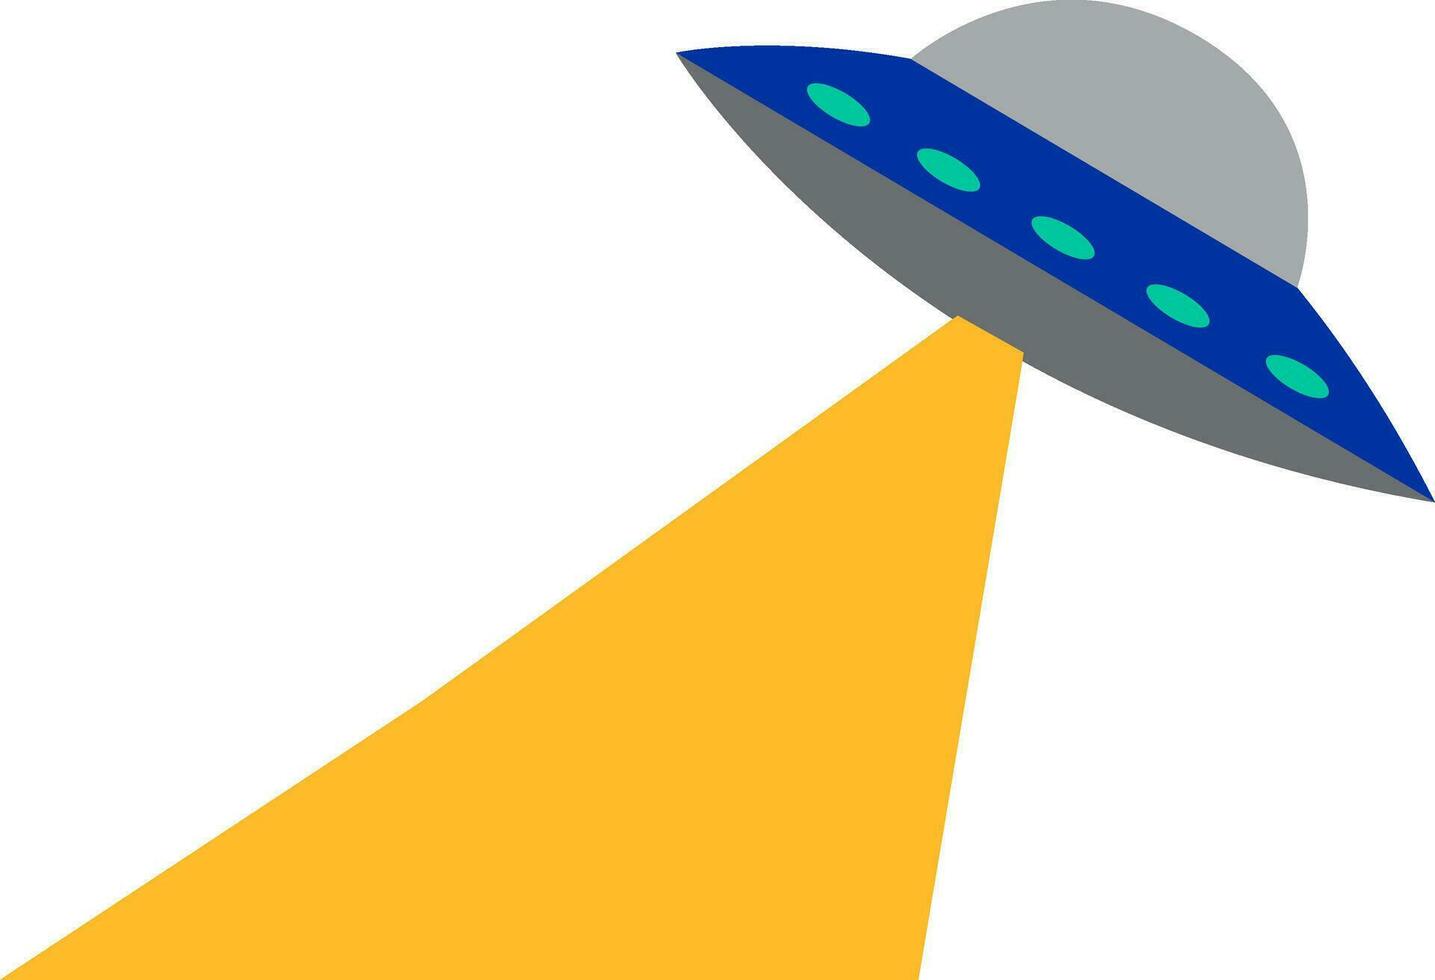 A round dome shaped alien spacecraft known as UFO vector color drawing or illustration